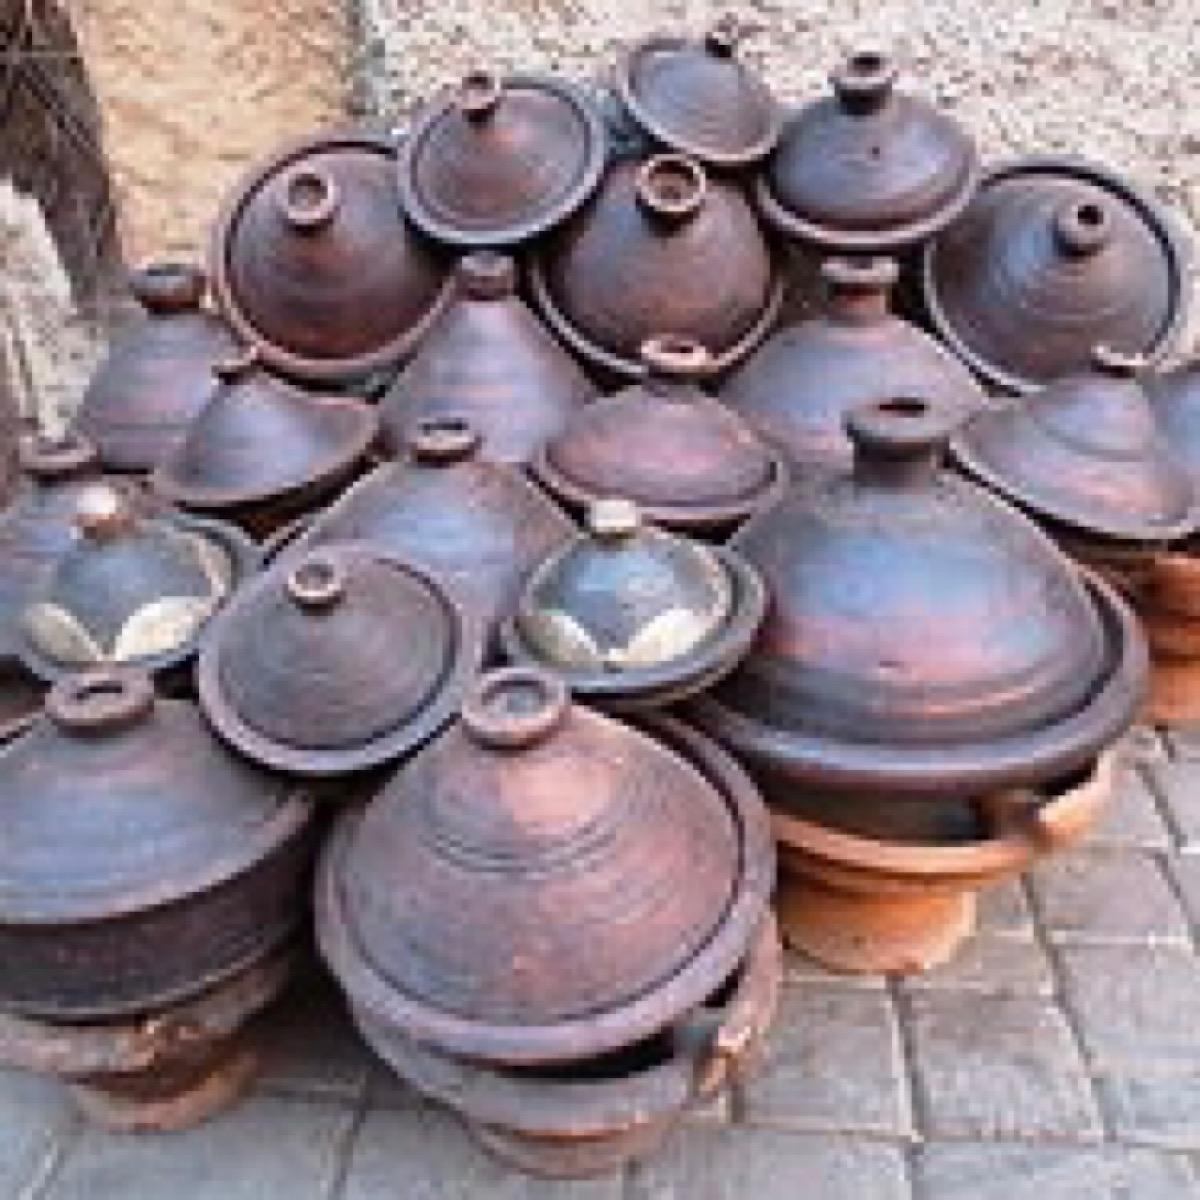 A pile of tagines on a street in Morocco